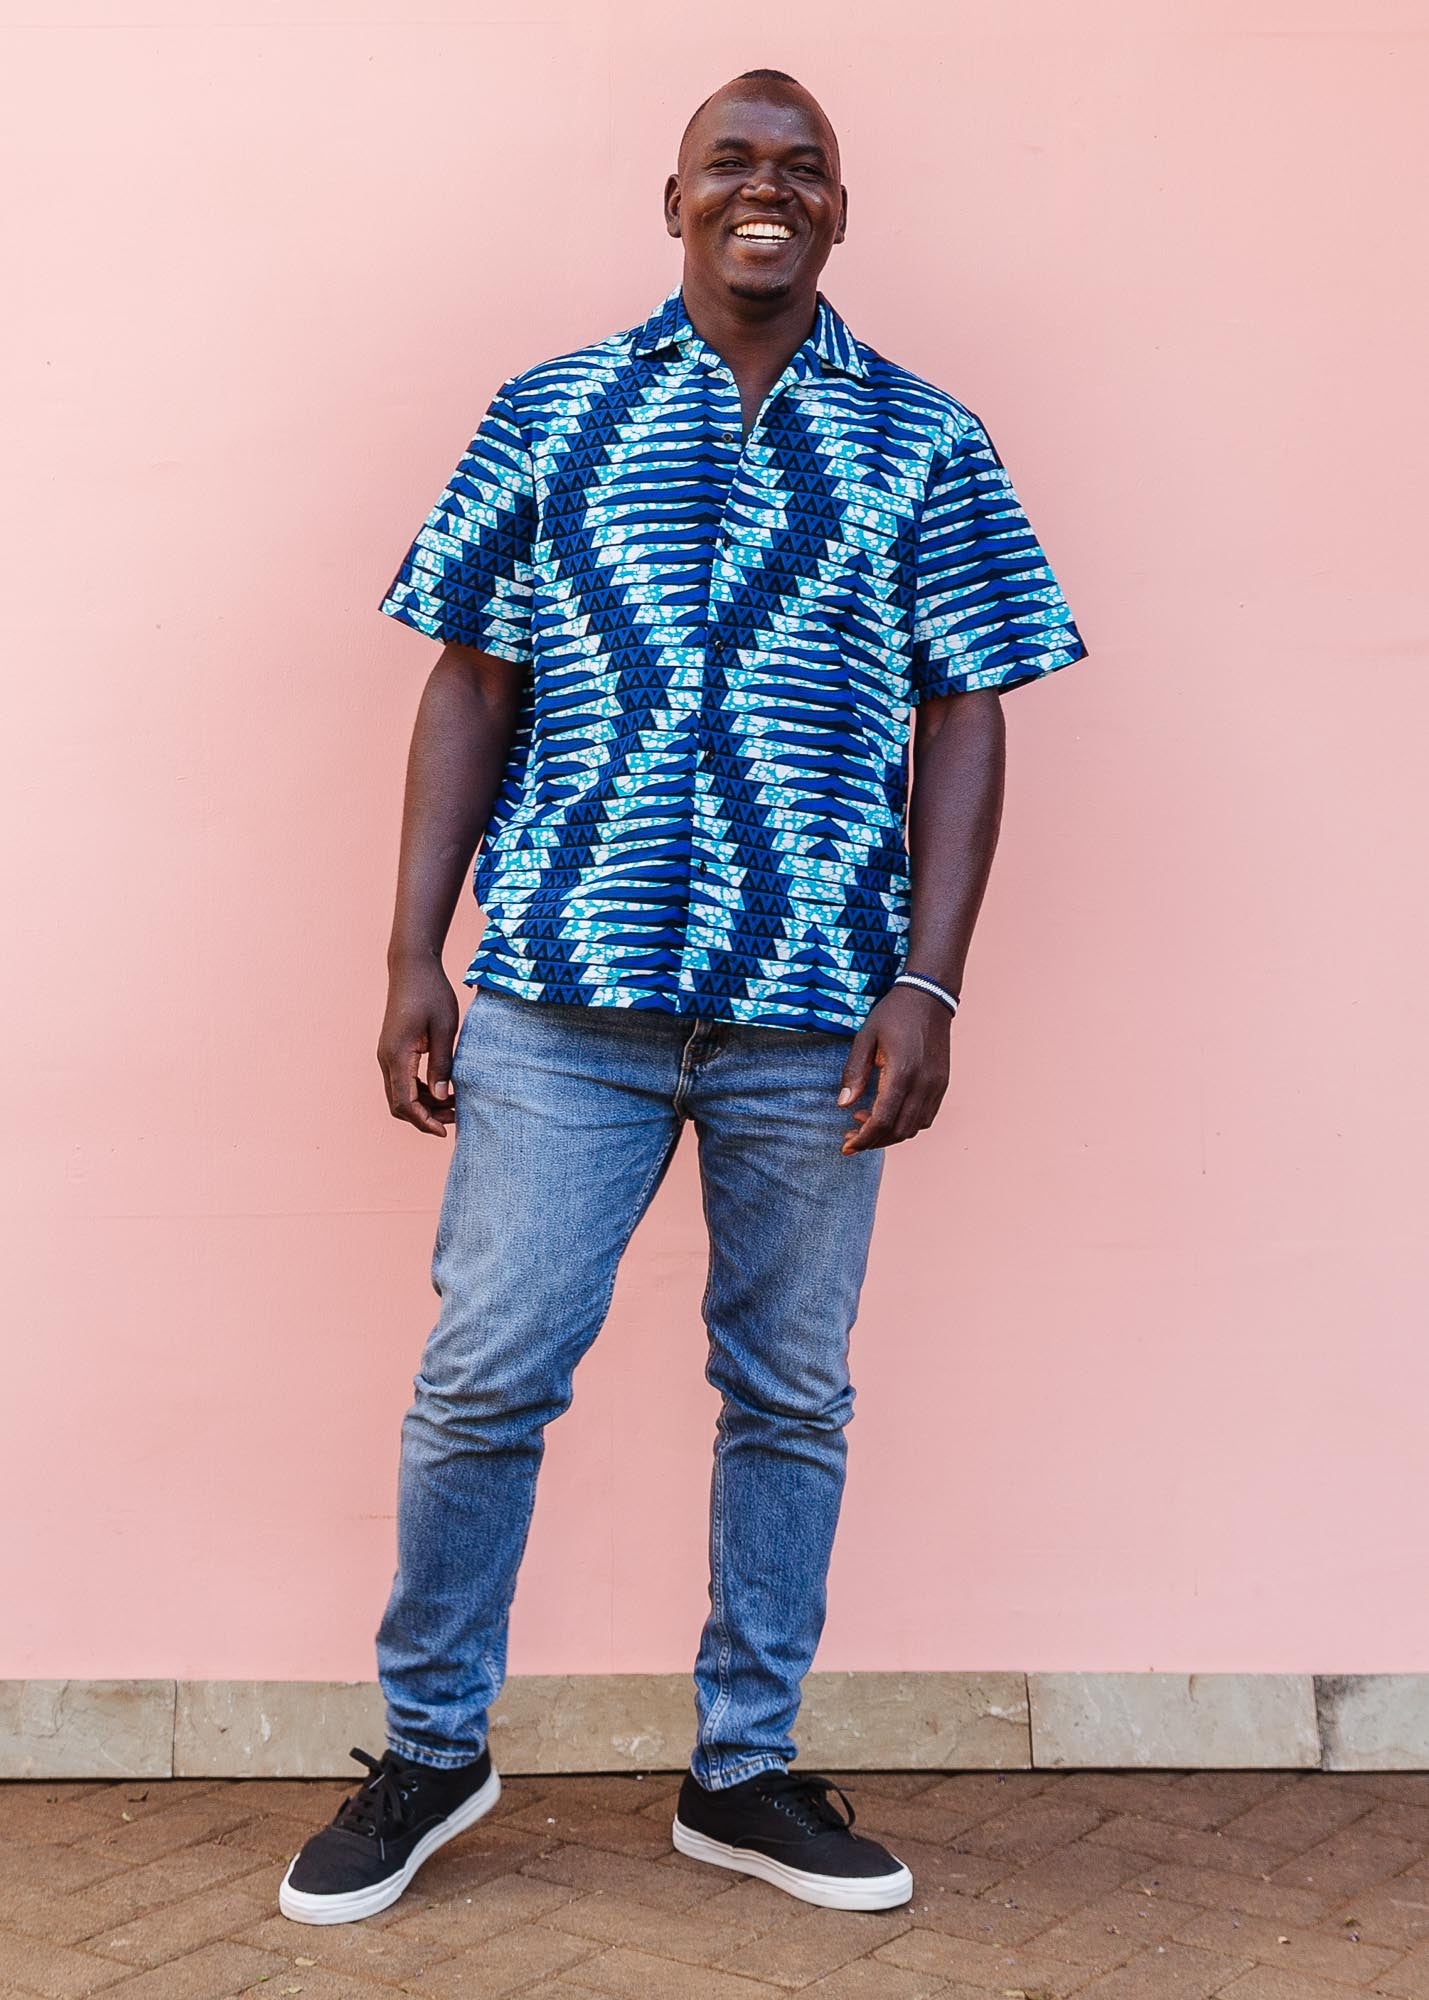 The model is wearing blue, sky blue and white colored men's shirt